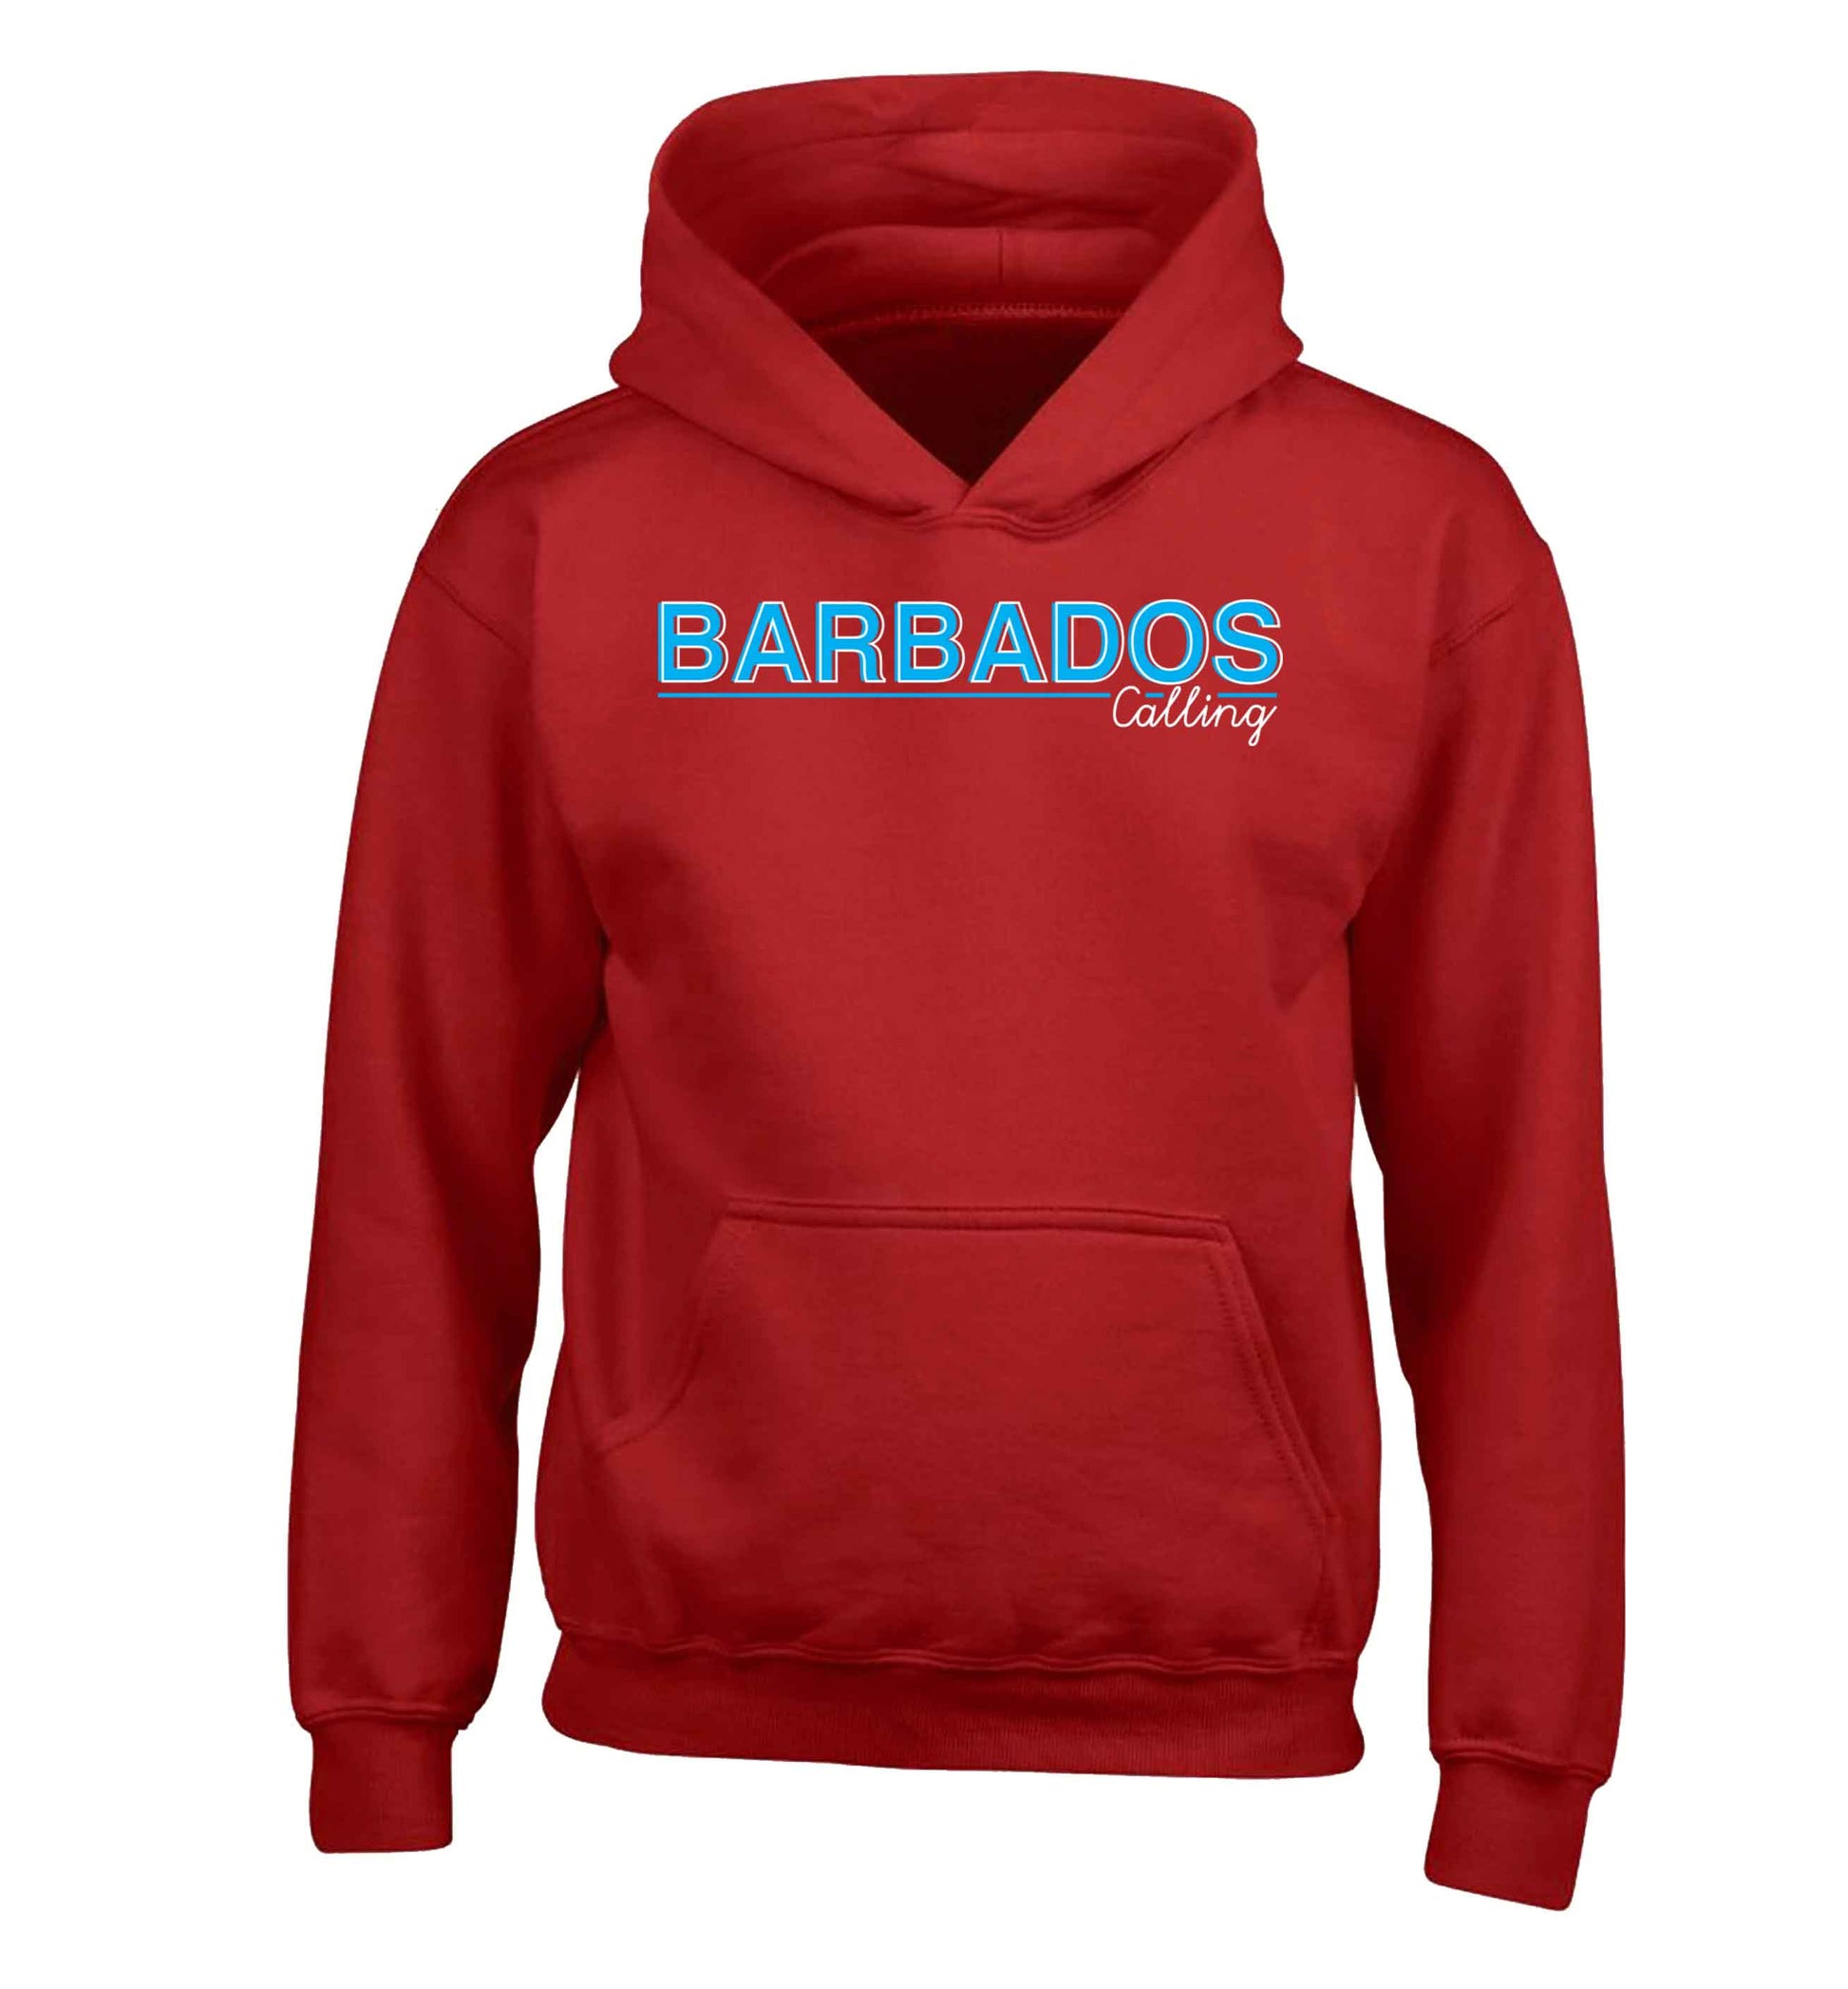 Barbados calling children's red hoodie 12-13 Years